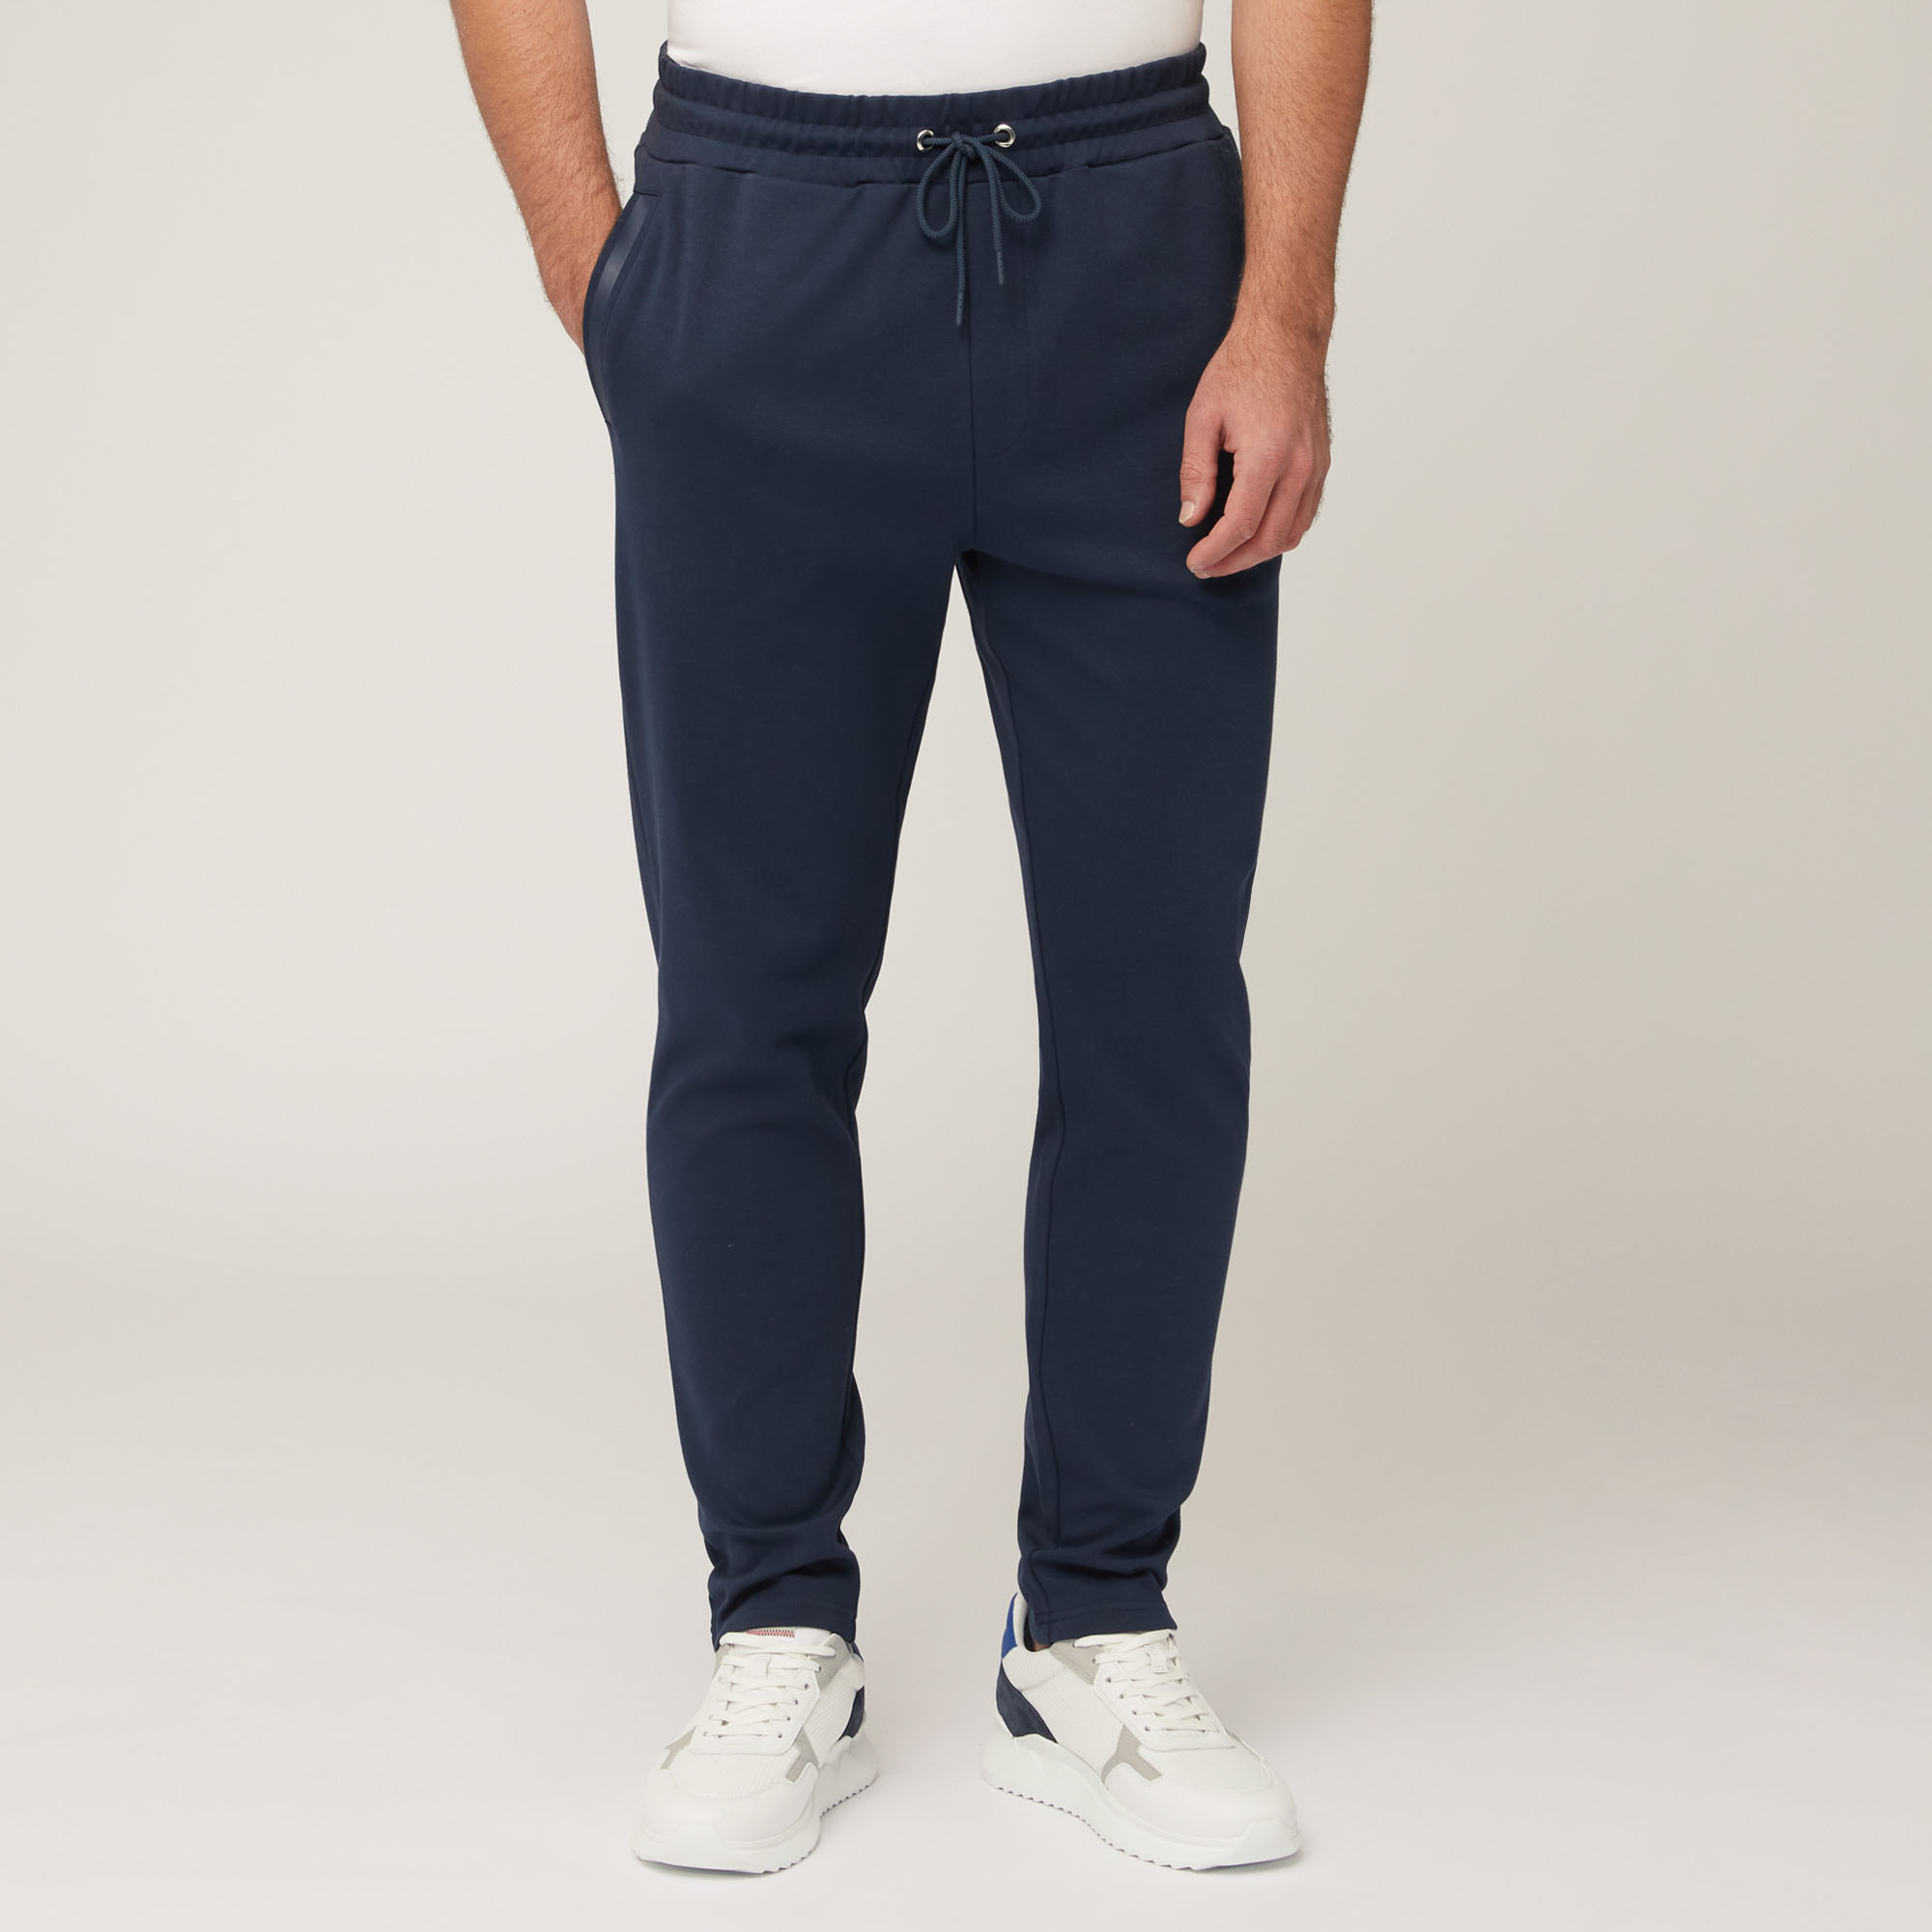 Pantaloni In Cotone Con Tasca Posteriore, Blu Navy, large image number 0